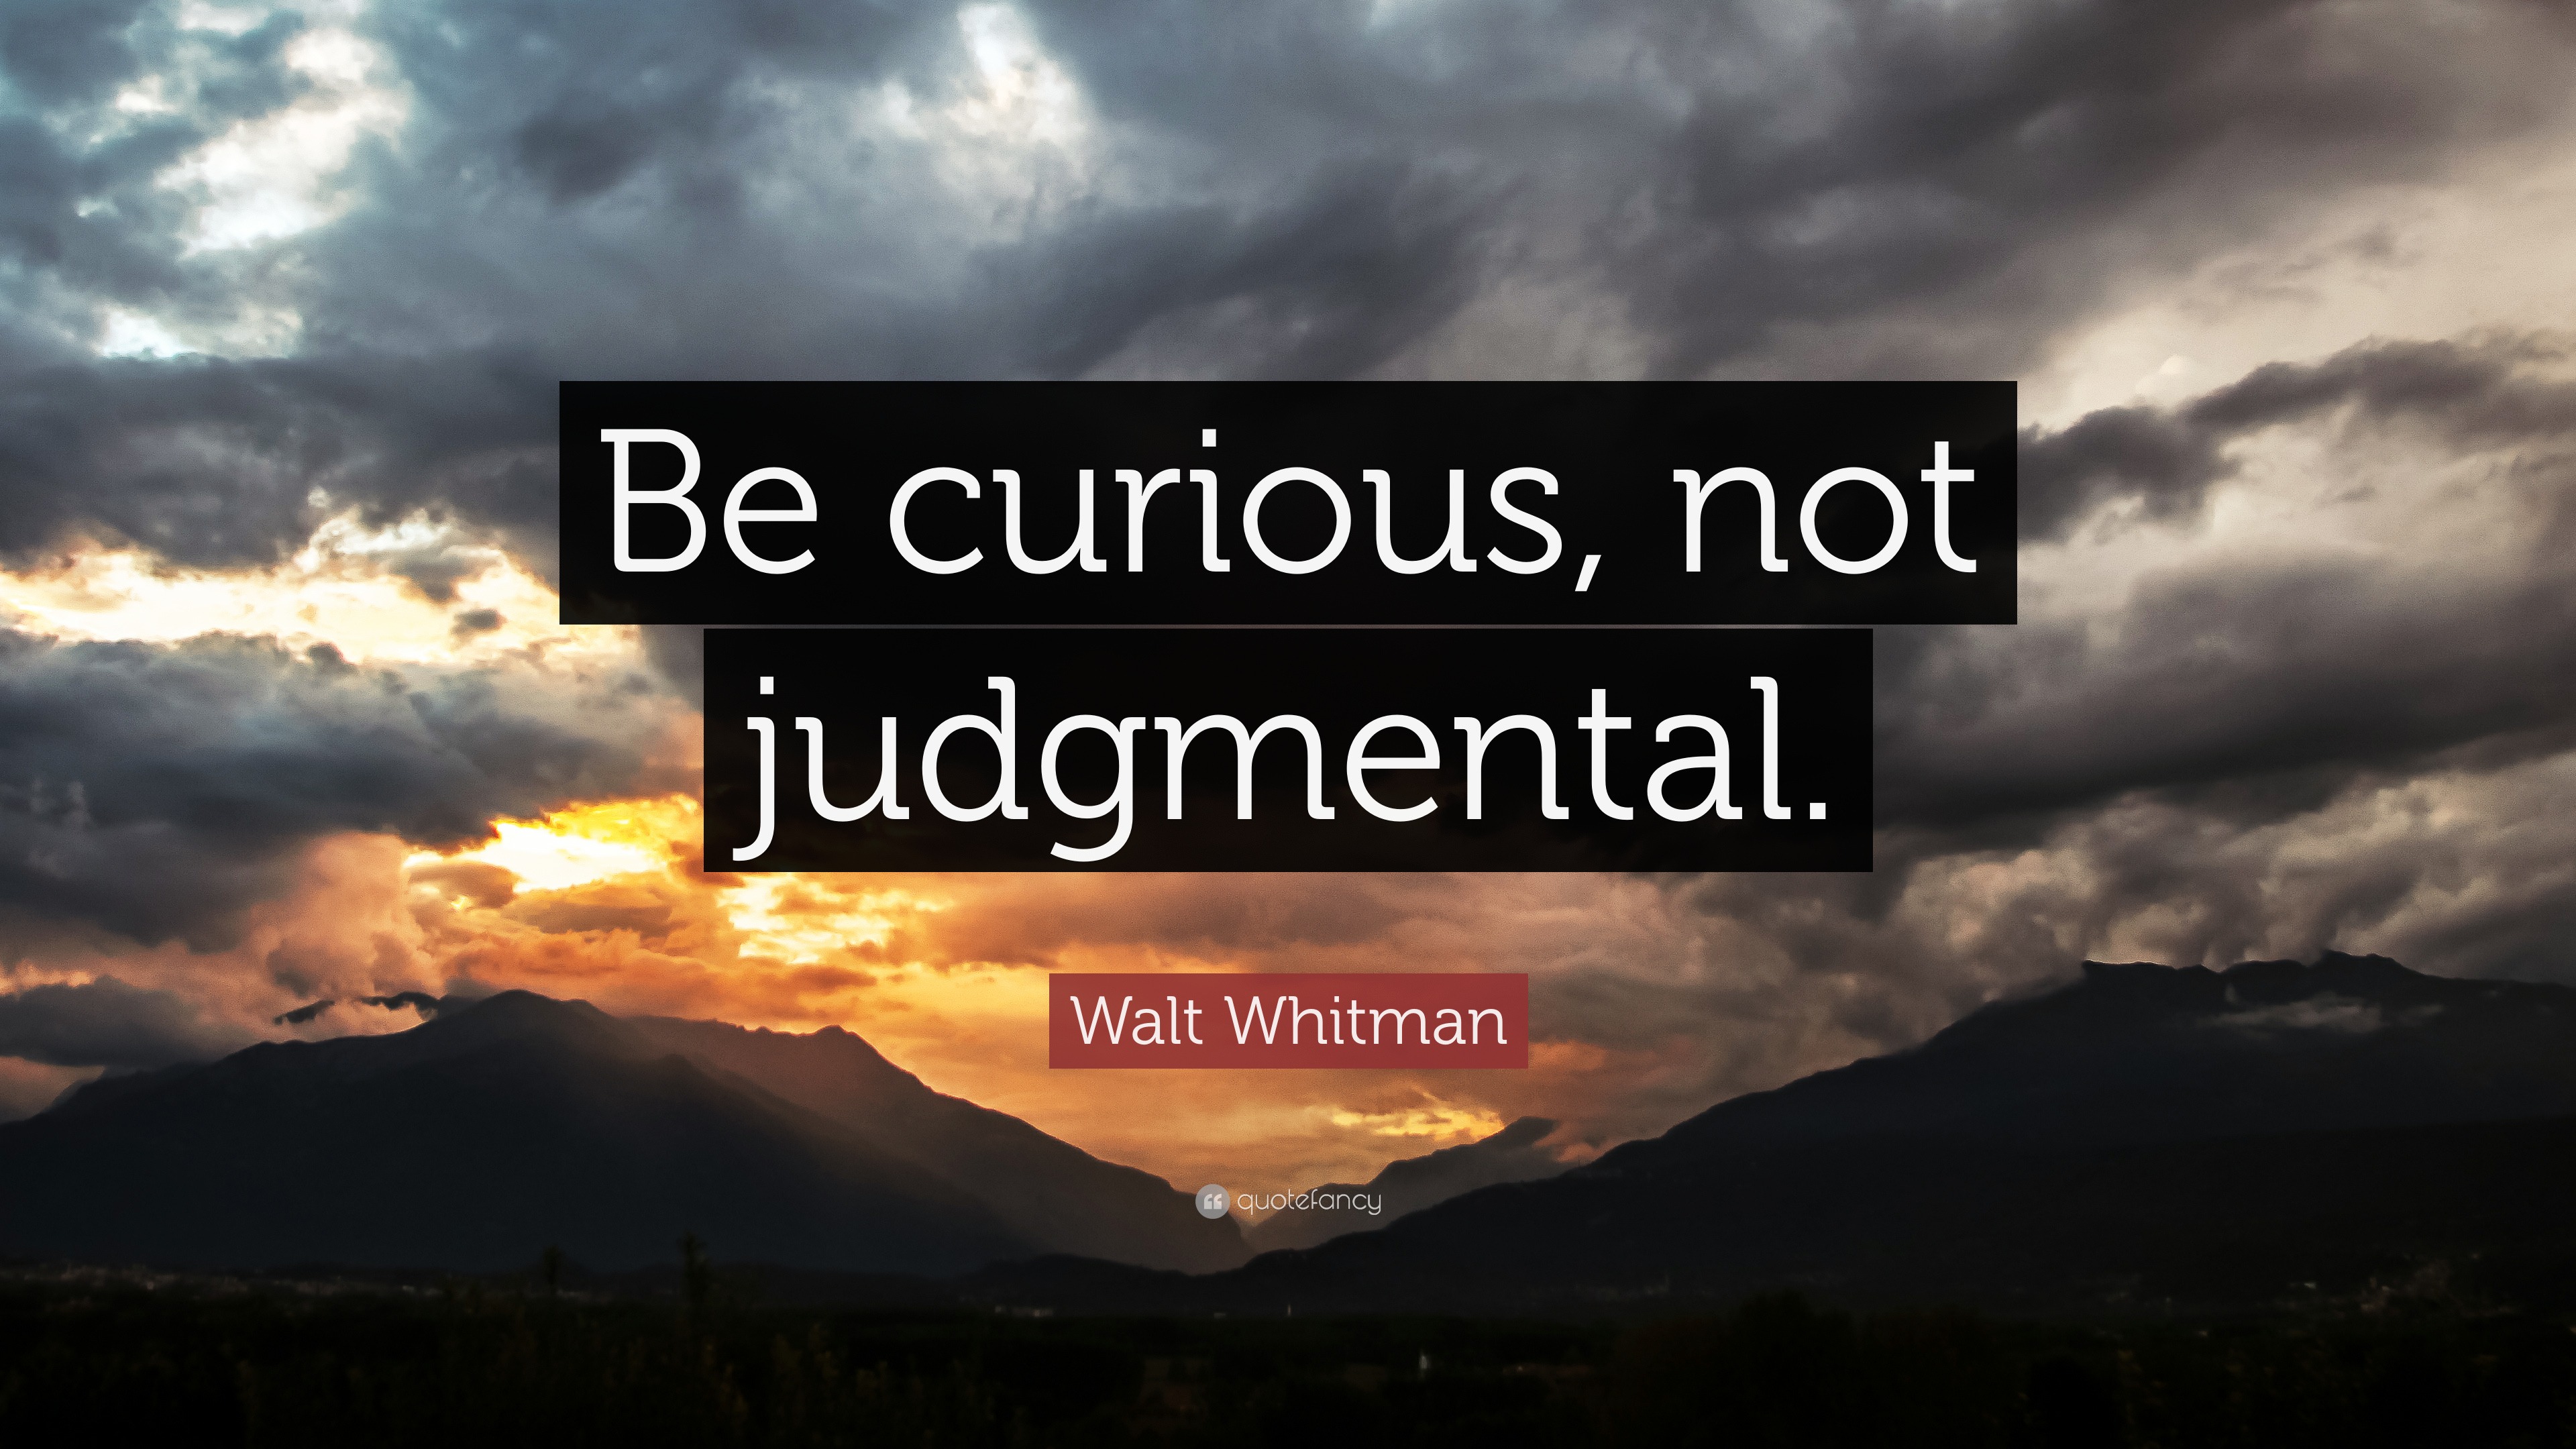 Walt Whitman Quote: “Be curious, not judgmental.” (12 wallpapers